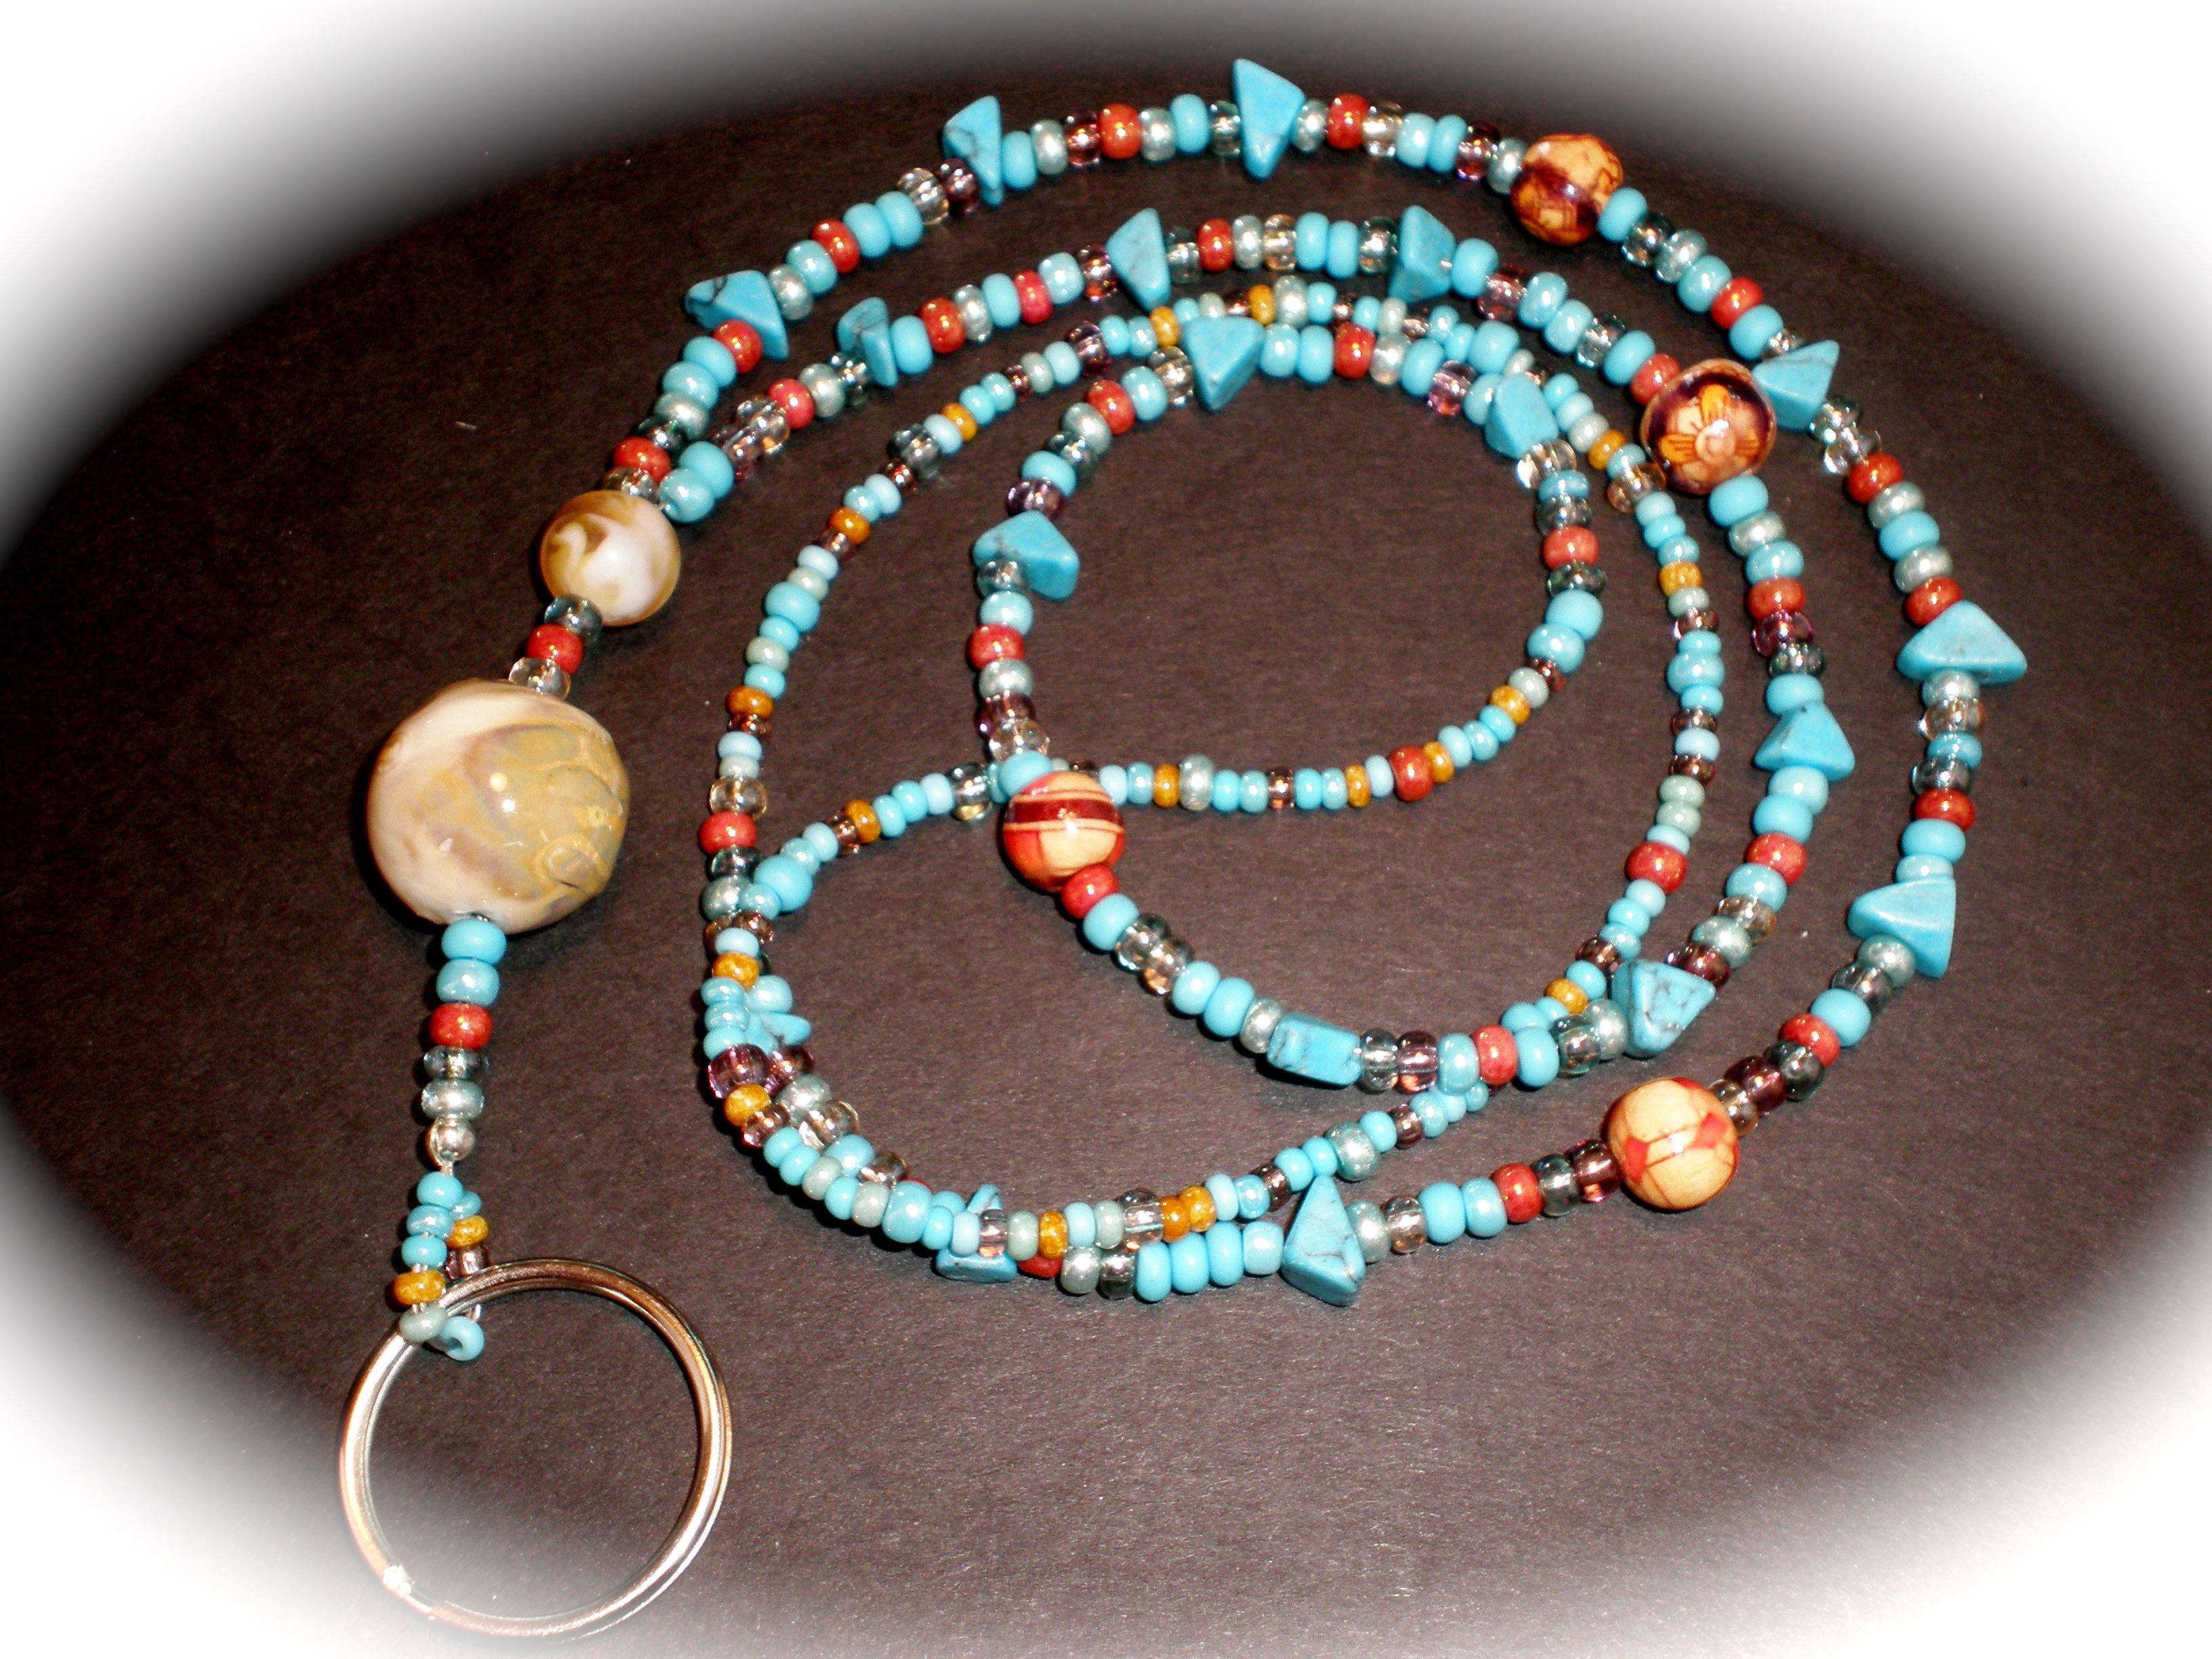 Hand Crafted Custom Turquoise Beaded Lanyard by Kindred Souls ...